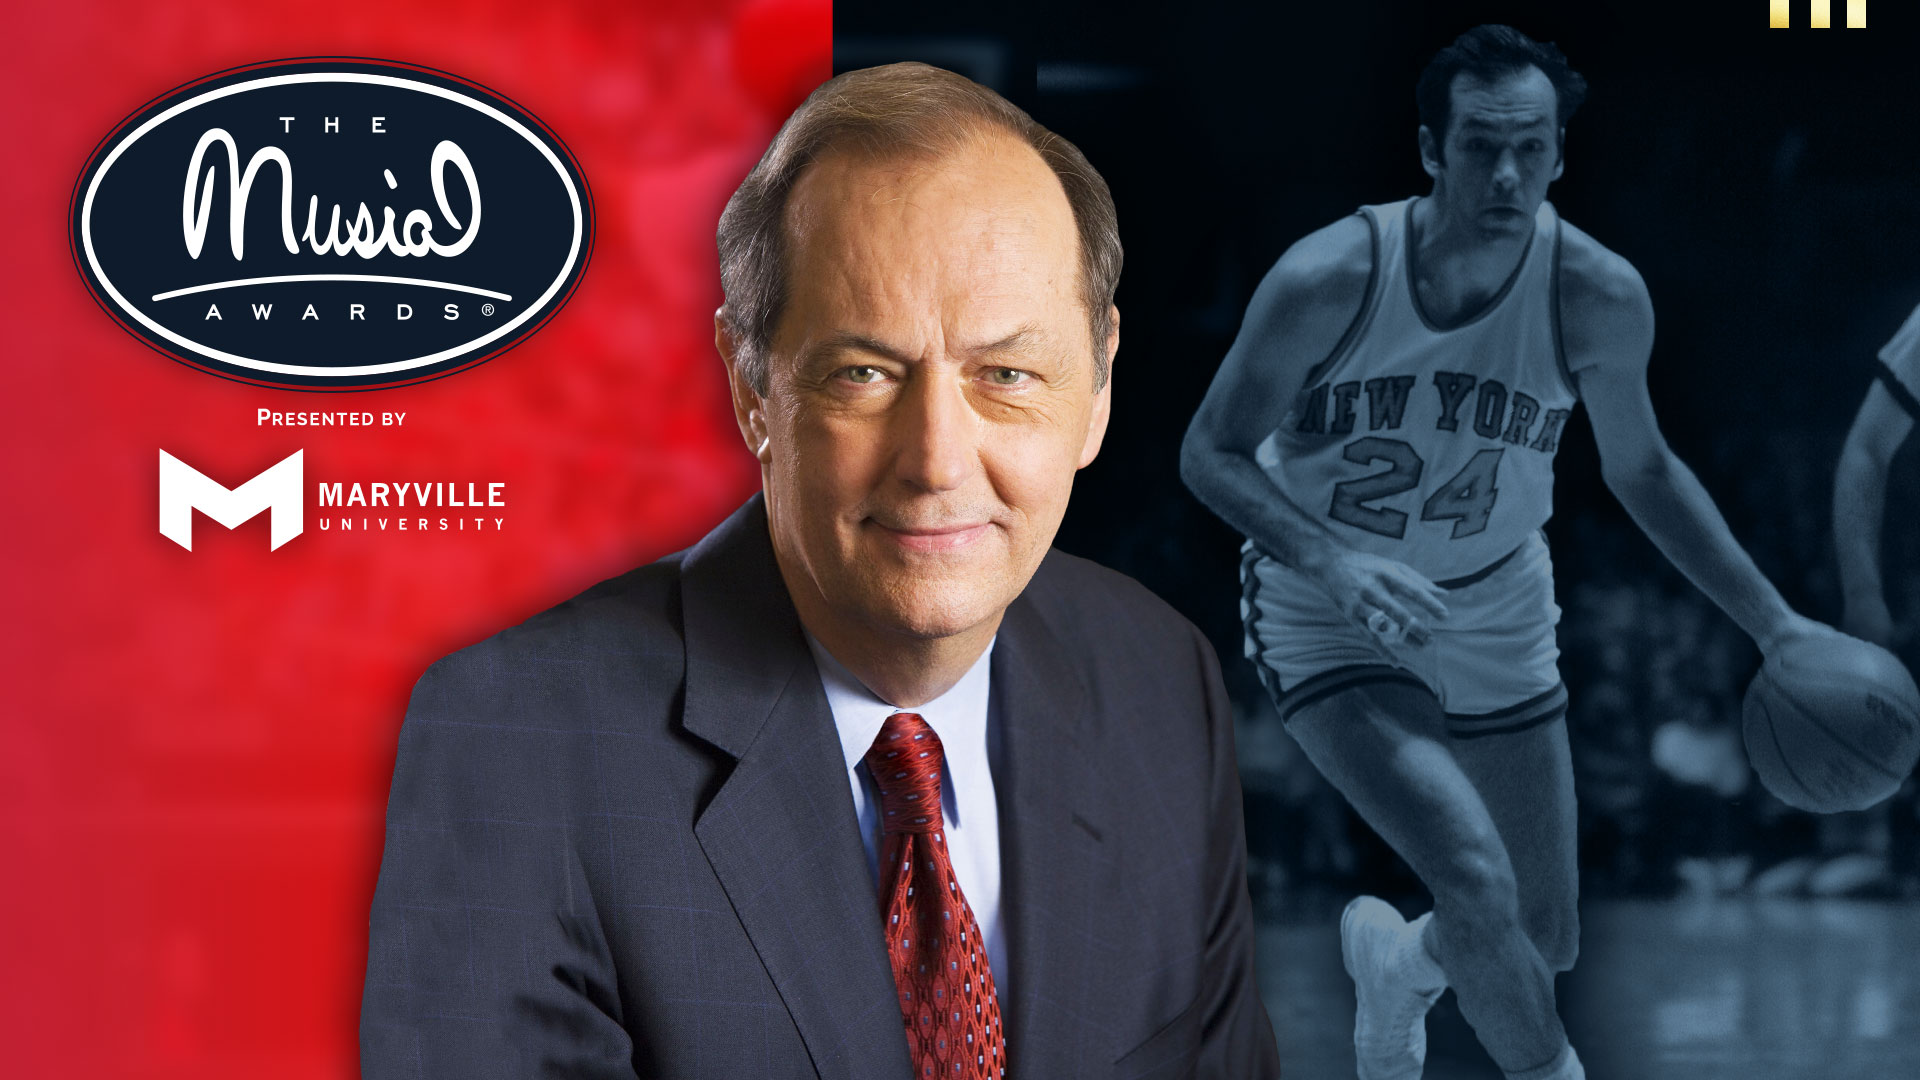 Musial Awards to Honor Bill Bradley with 2023 Lifetime Achievement Award for Sportsmanship